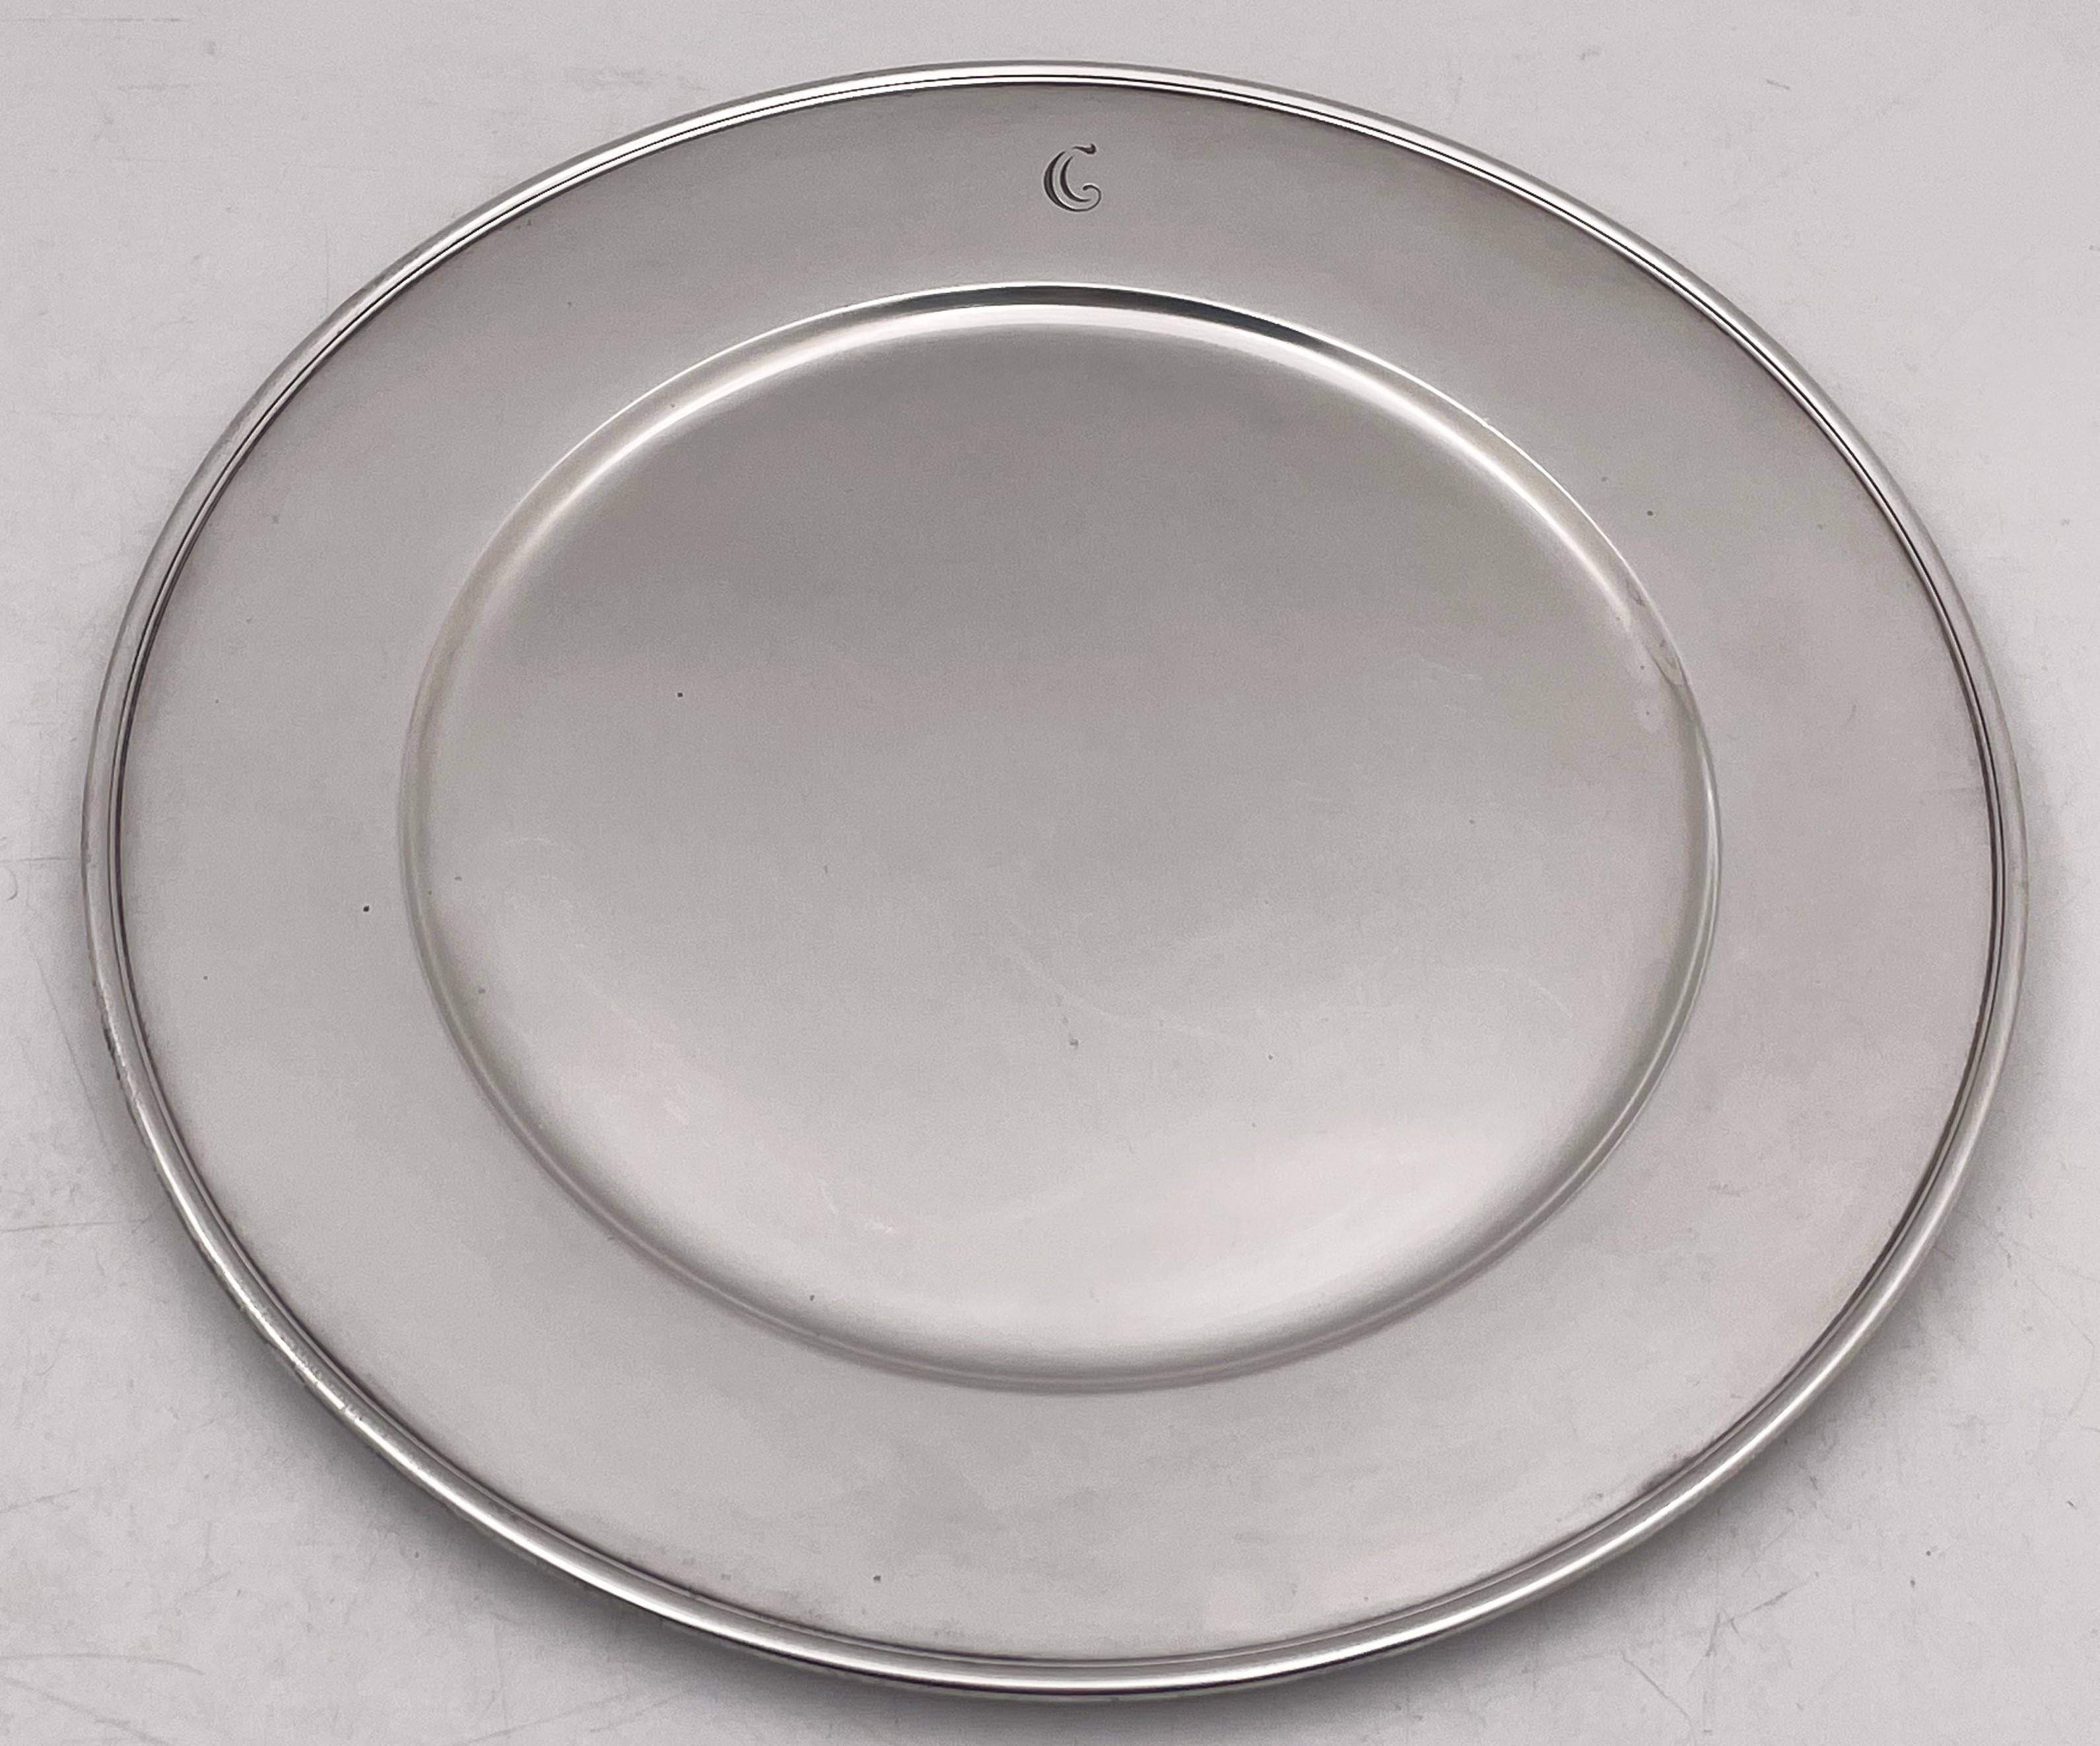 Set of 3 Tiffany & Co. sterling silver chargers or dinner plates in pattern number 18250 from 1912 and in Art Deco style with an elegant, geometric design. They measure 11'' in diameter by 5/8'' in height, weigh 52.5 troy ounces, and bear hallmarks